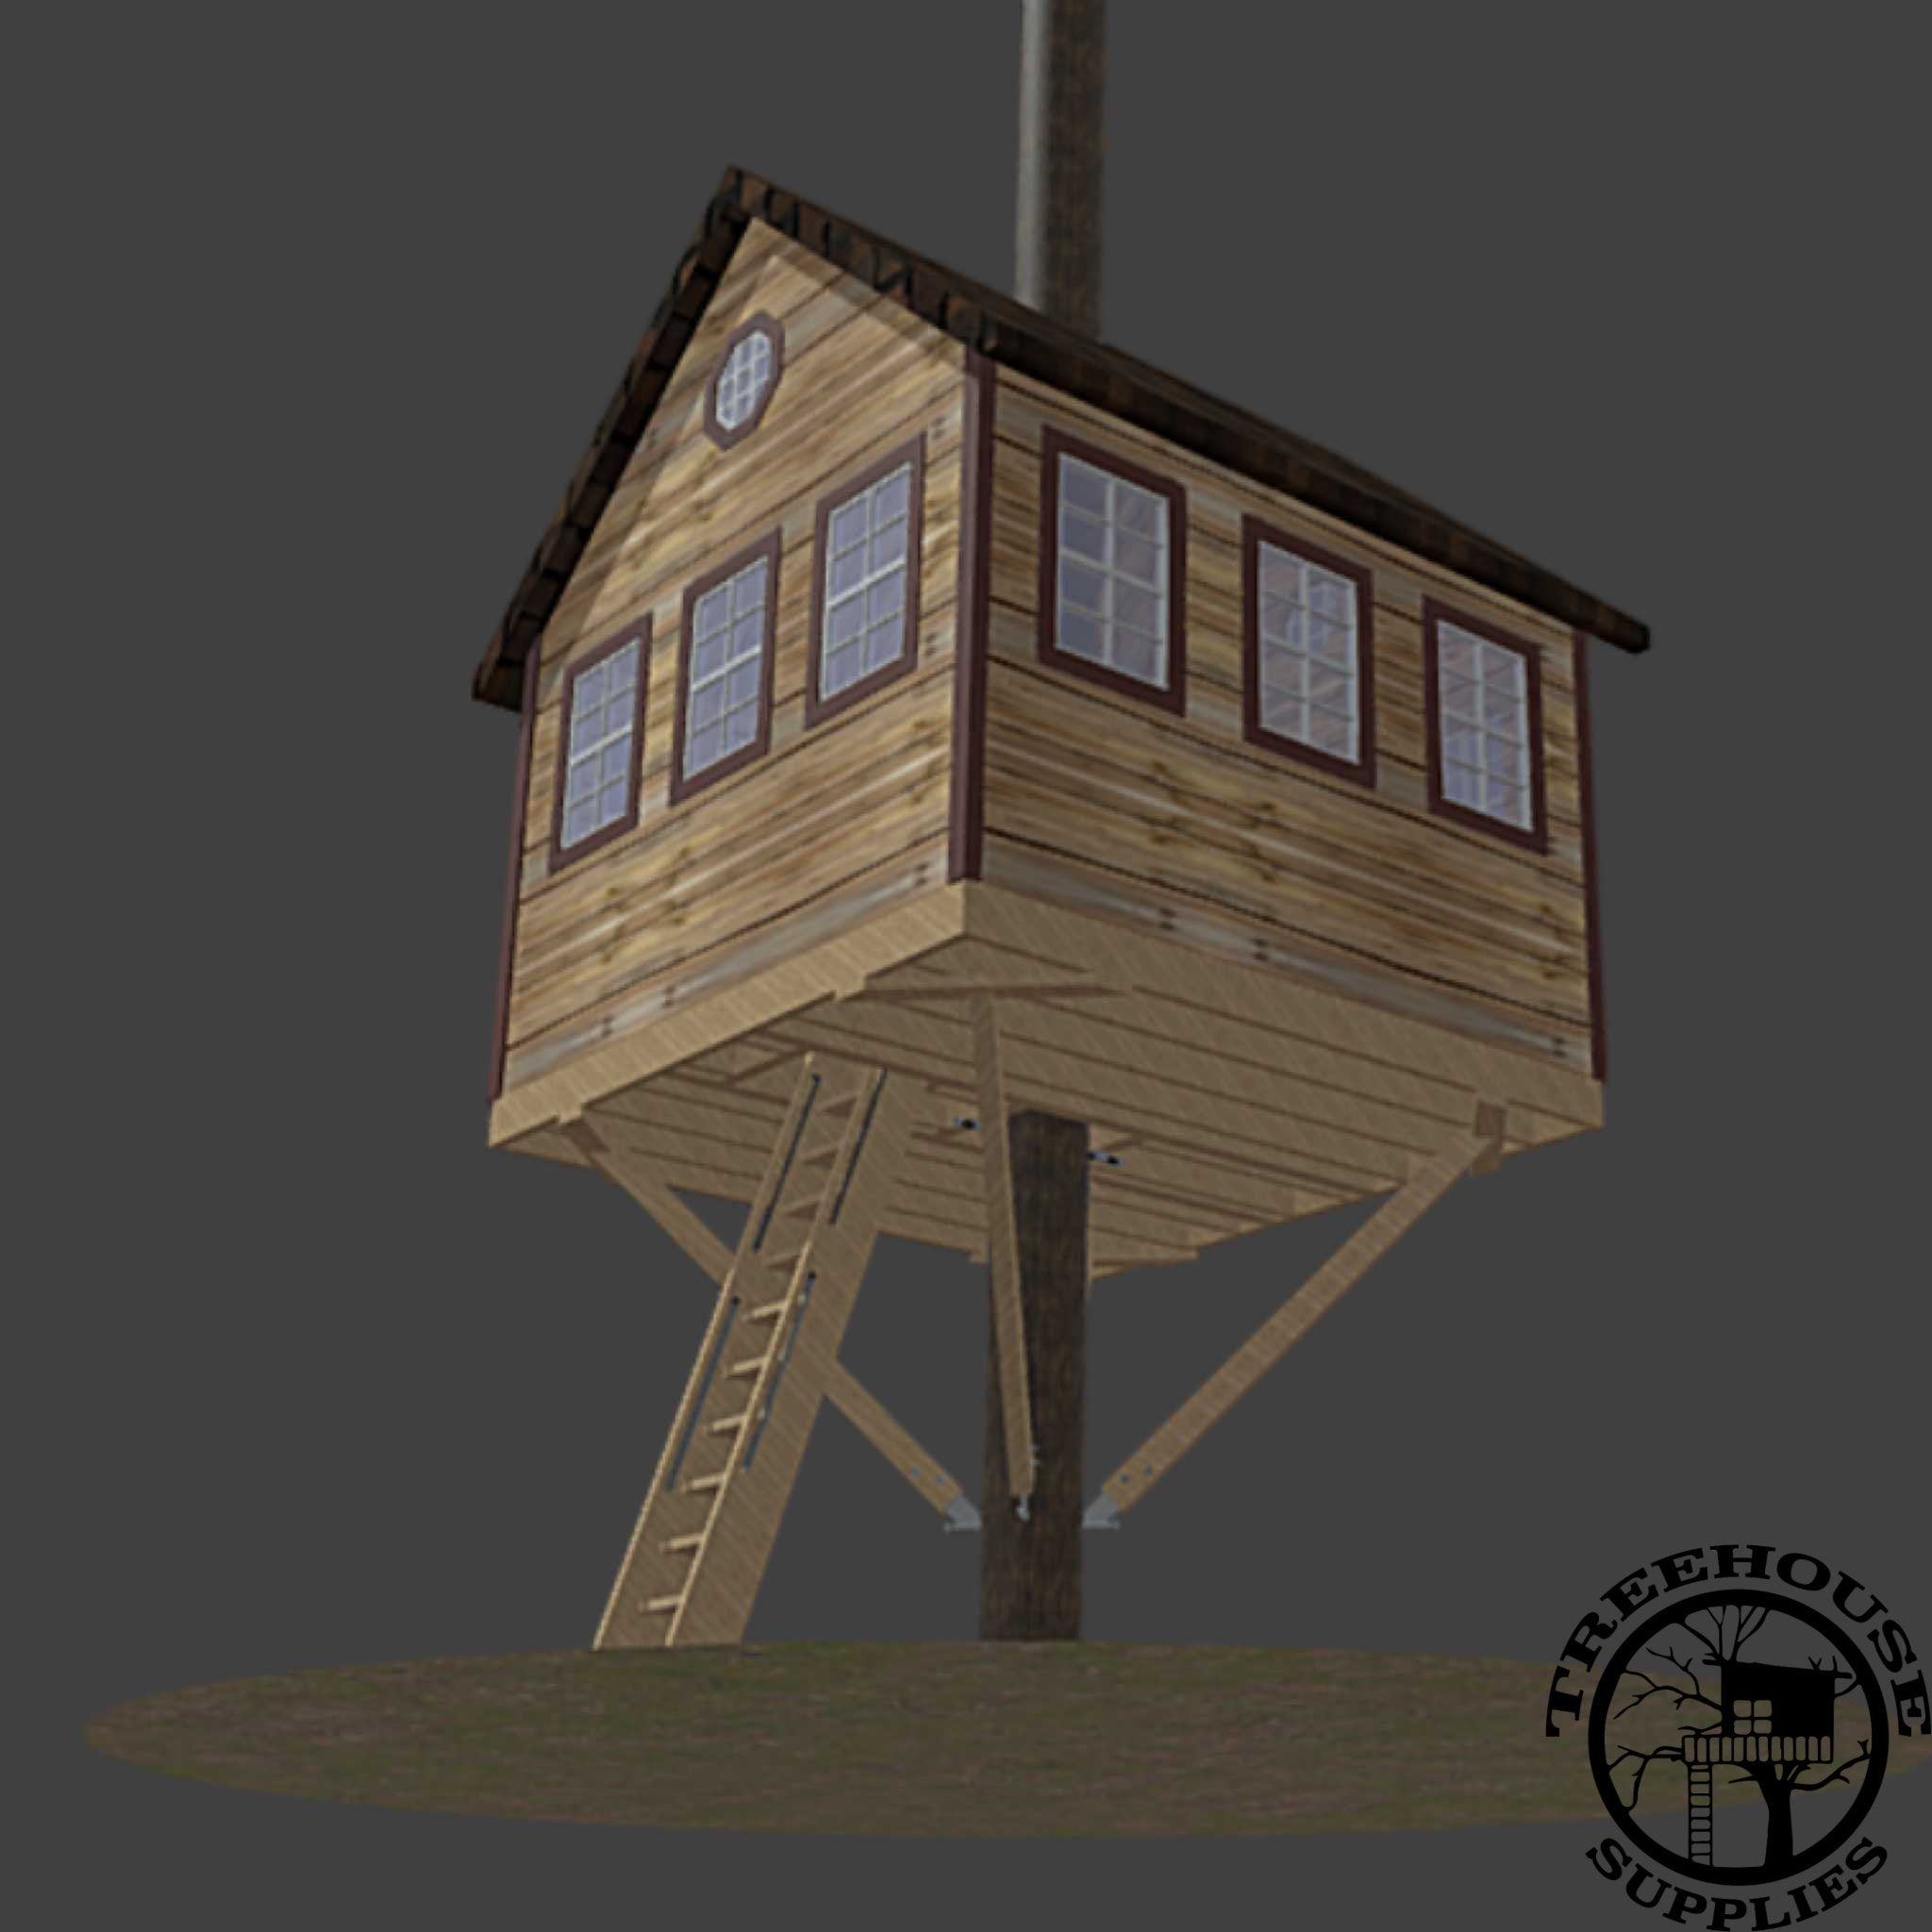 6' SQUARE TREEHOUSE PLAN - NOW INCLUDES STEP-BY-STEP 3D MODELING!! - Treehouse Supplies